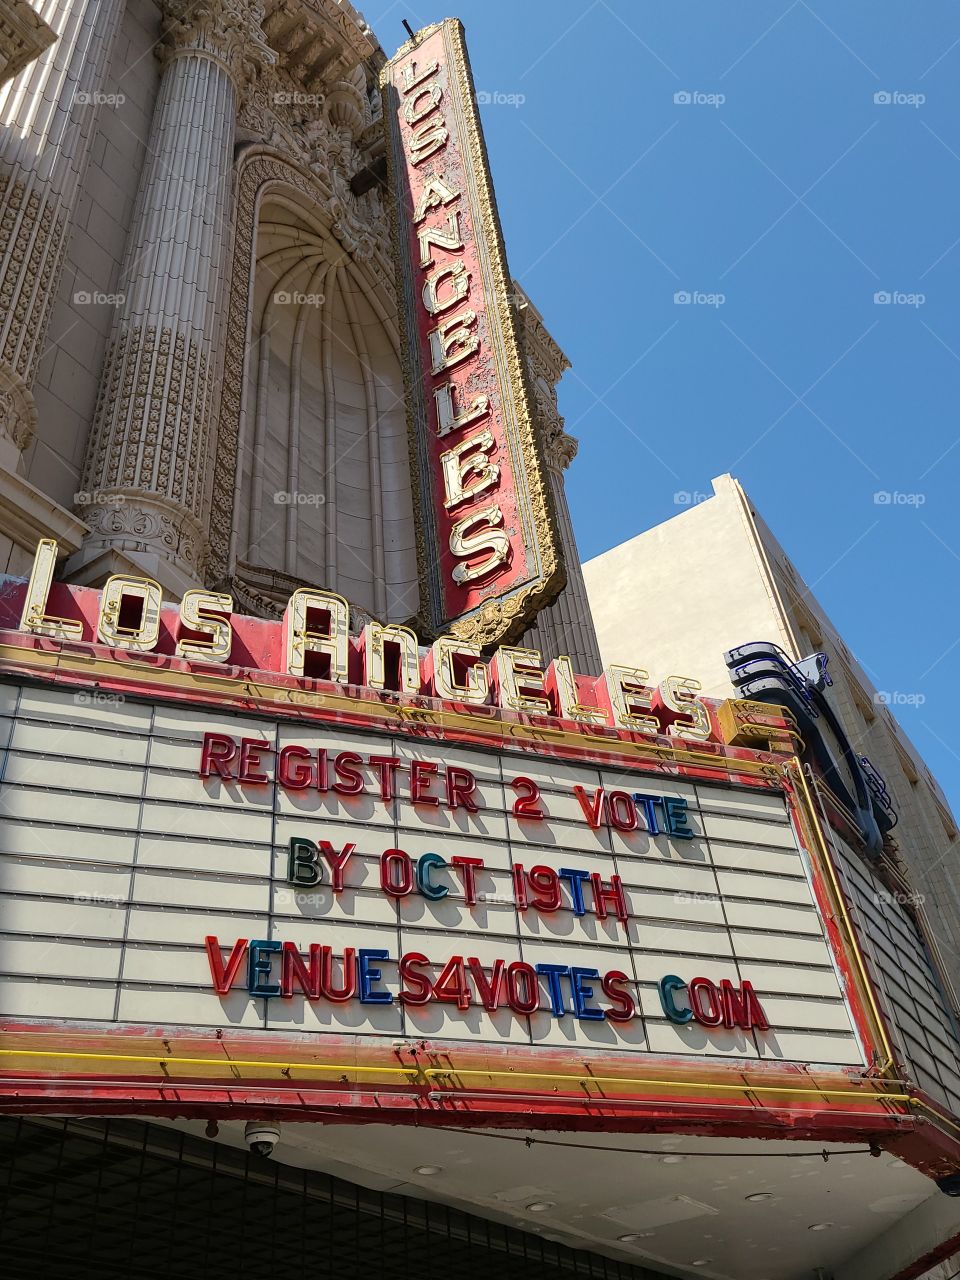 Getting the vote out by theater marquee in Los Angeles.